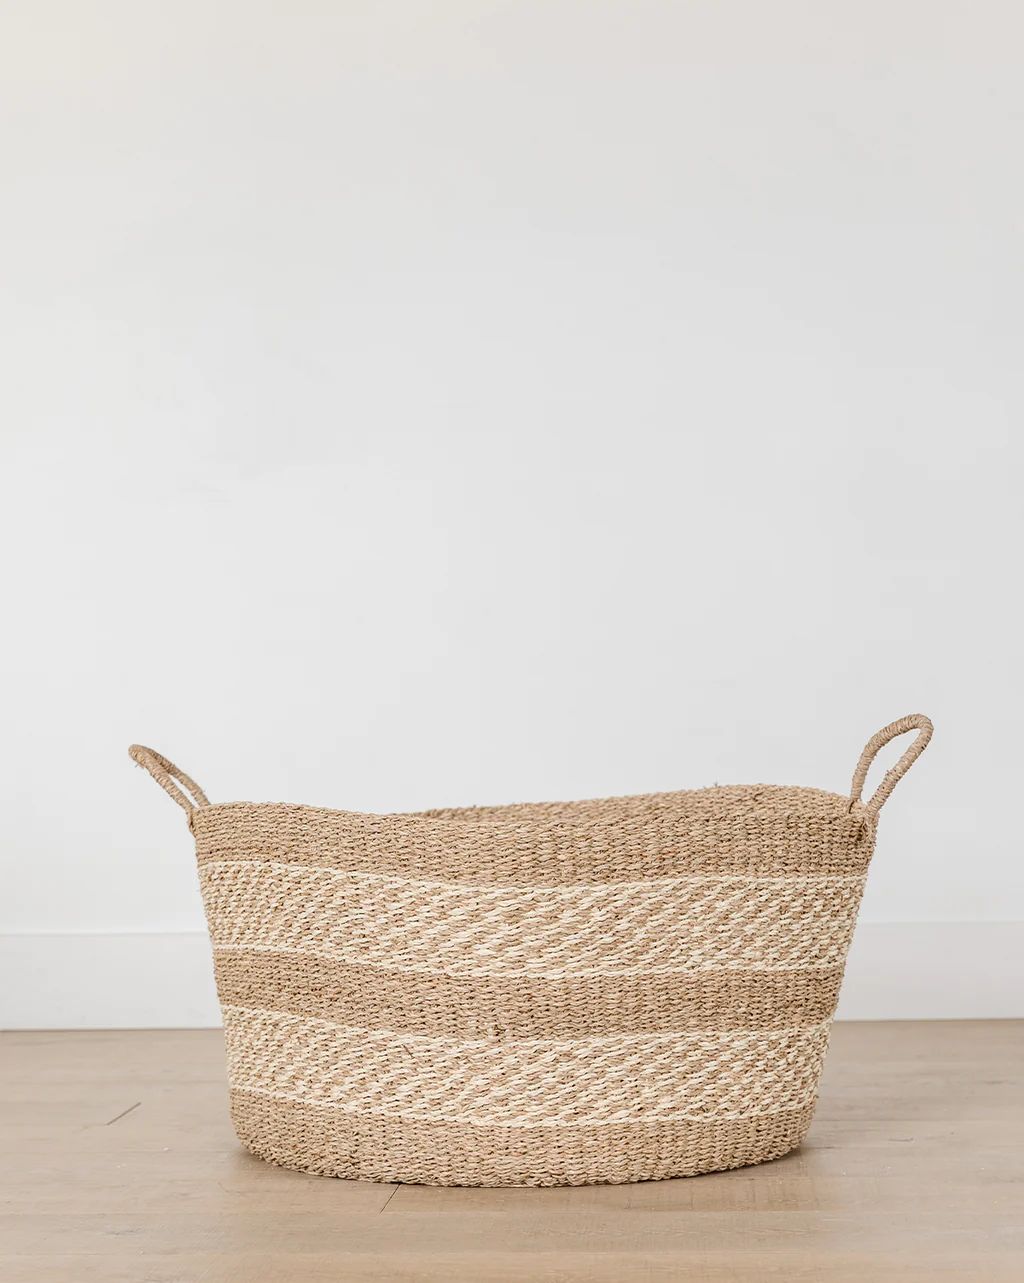 Coming Soon: Sitka Tree Basket | McGee & Co.